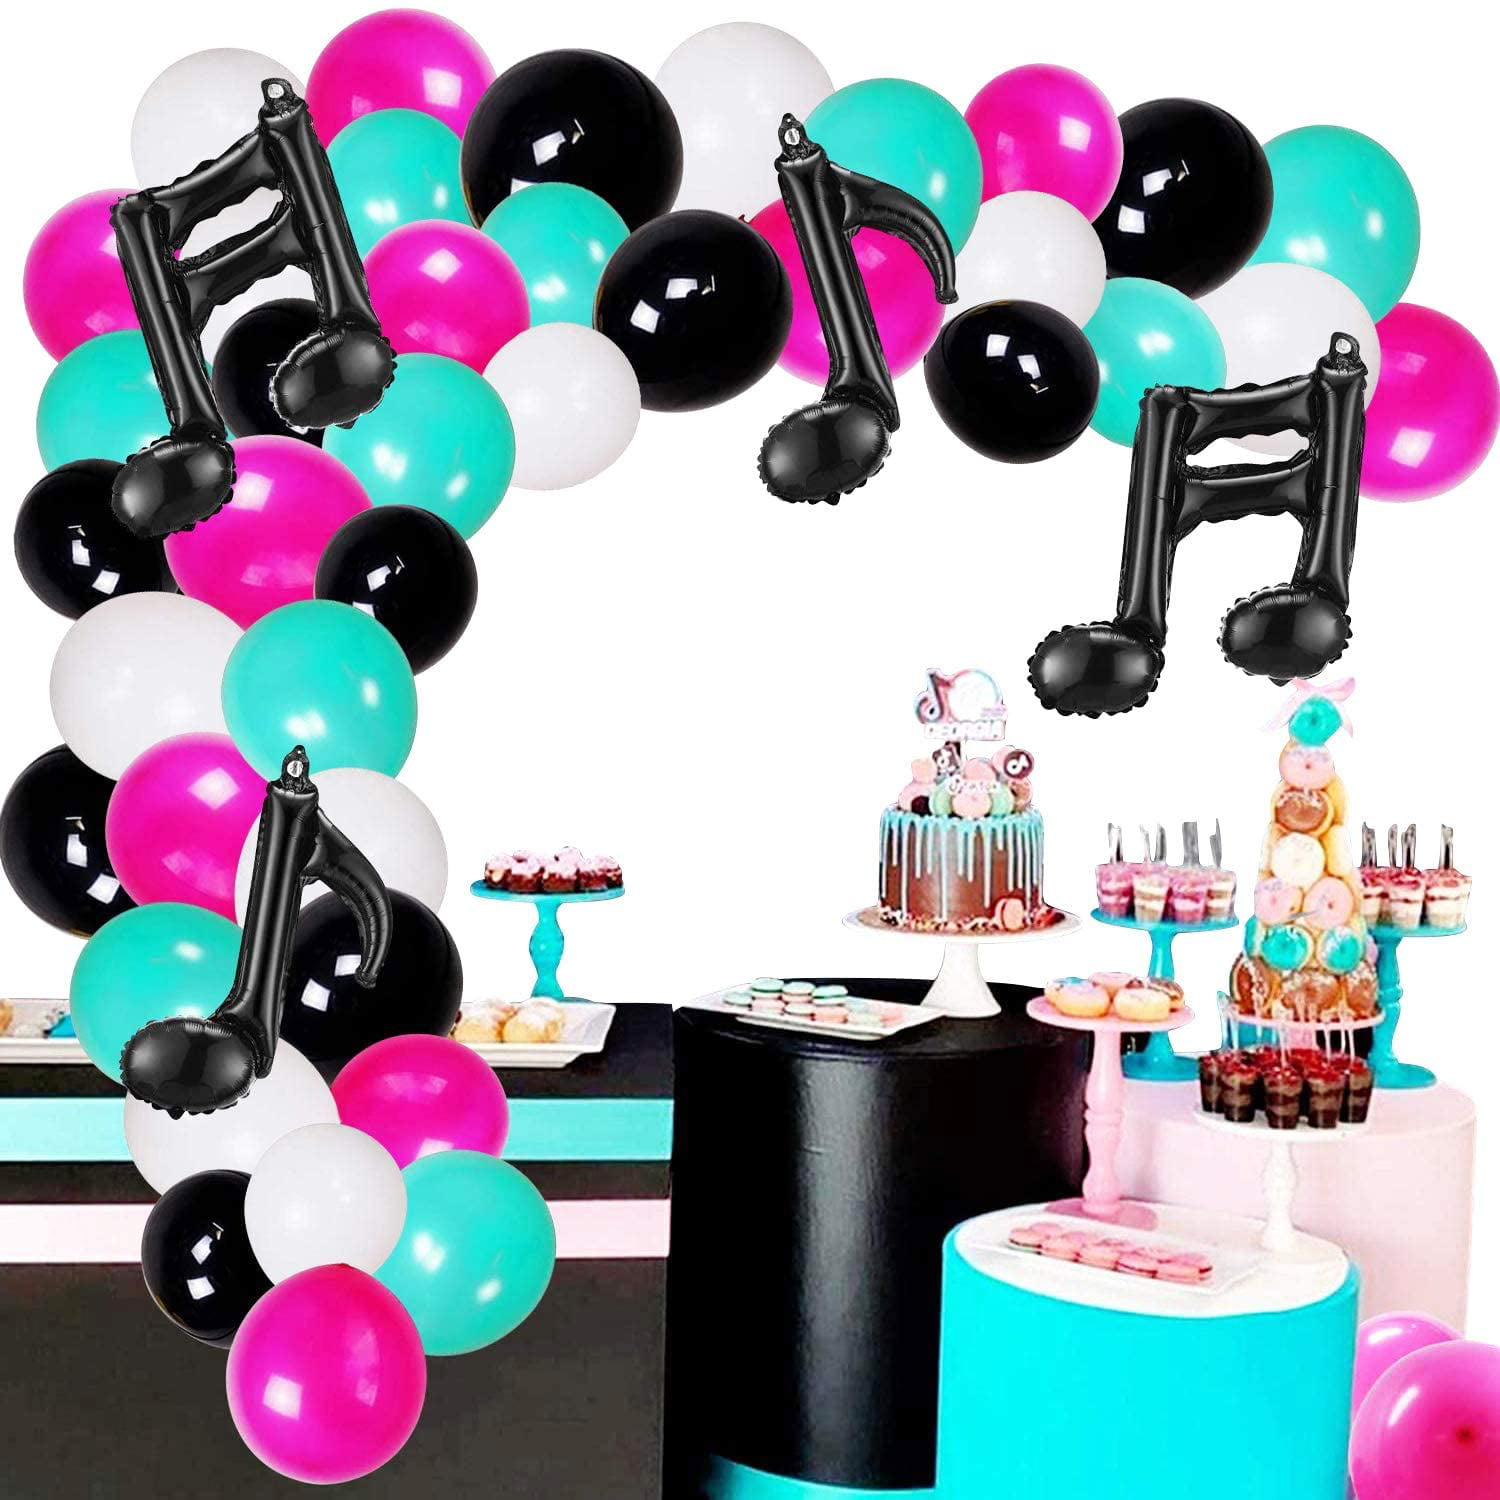 TIK TOK Balloons Theme Party Balloon Music Note Balloons Birthday Party TIK TOK Decorations for Fans Party Supplies Central Cafe Sofa Door Music Party Short Video Balloons 35Pcs Party Balloons 